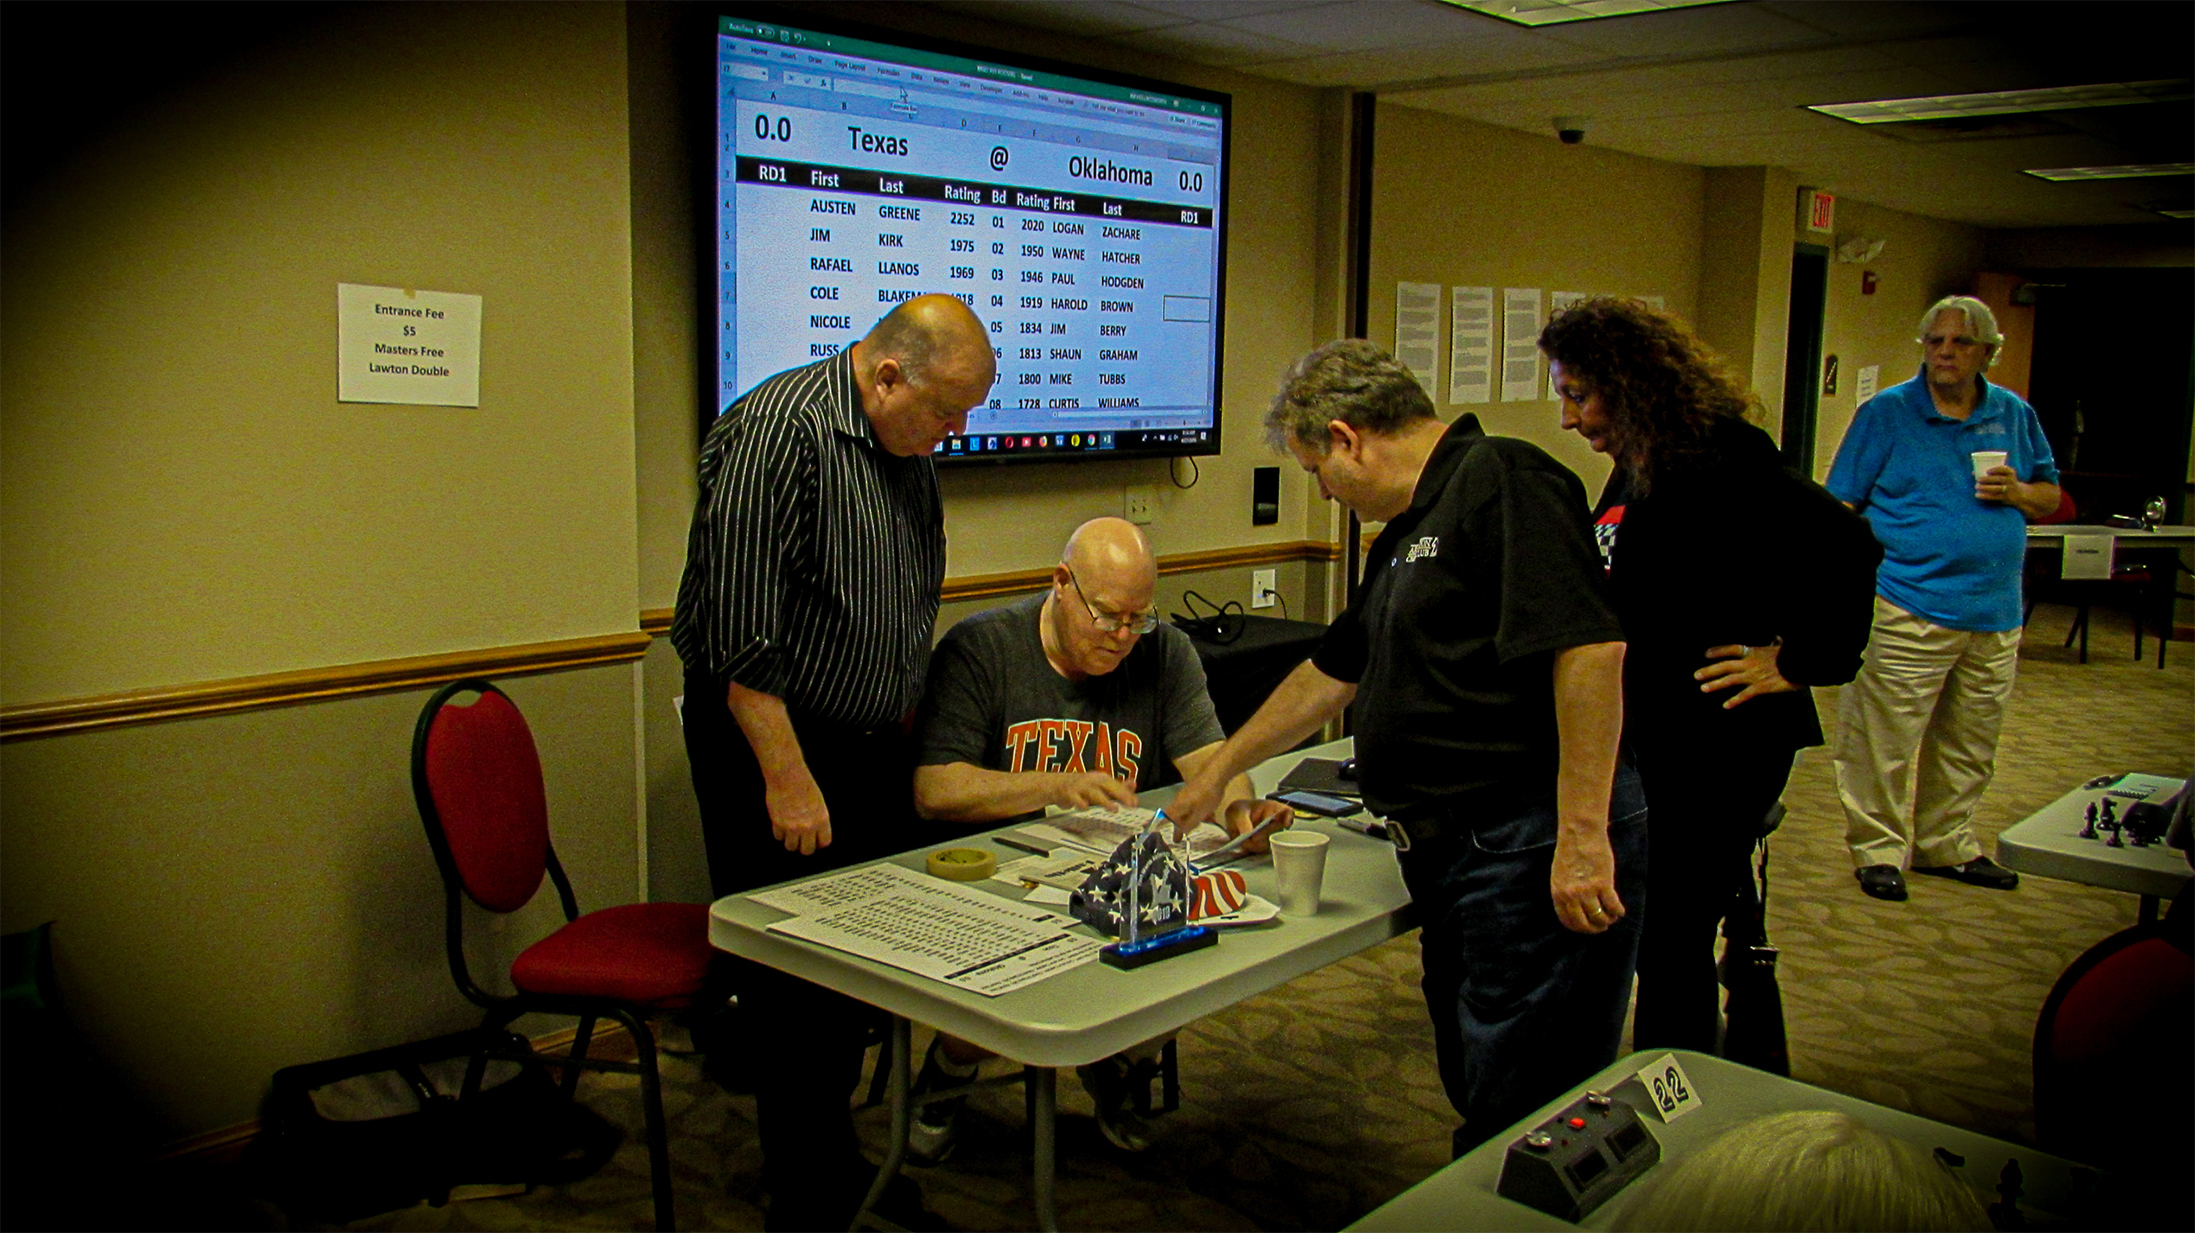 Both Team Captains huddle with Chief TD Jim Hollingsworth (second from left) to determine which Murray County Open players are available to fill two match section slots (one for each team).  Oklahoma Captain Phil Stegall (far left) ponders the "Jim Hollingsworth Solution" as Texas Captain Chris Wood (third from left) points out an adjustment for Boards 10 and 14 to better align the ratings.  Texan Sheryl McBroom (fourth from left) looks on.  In the background is Texan Troy Gillispie.  Photo by Mike Tubbs.